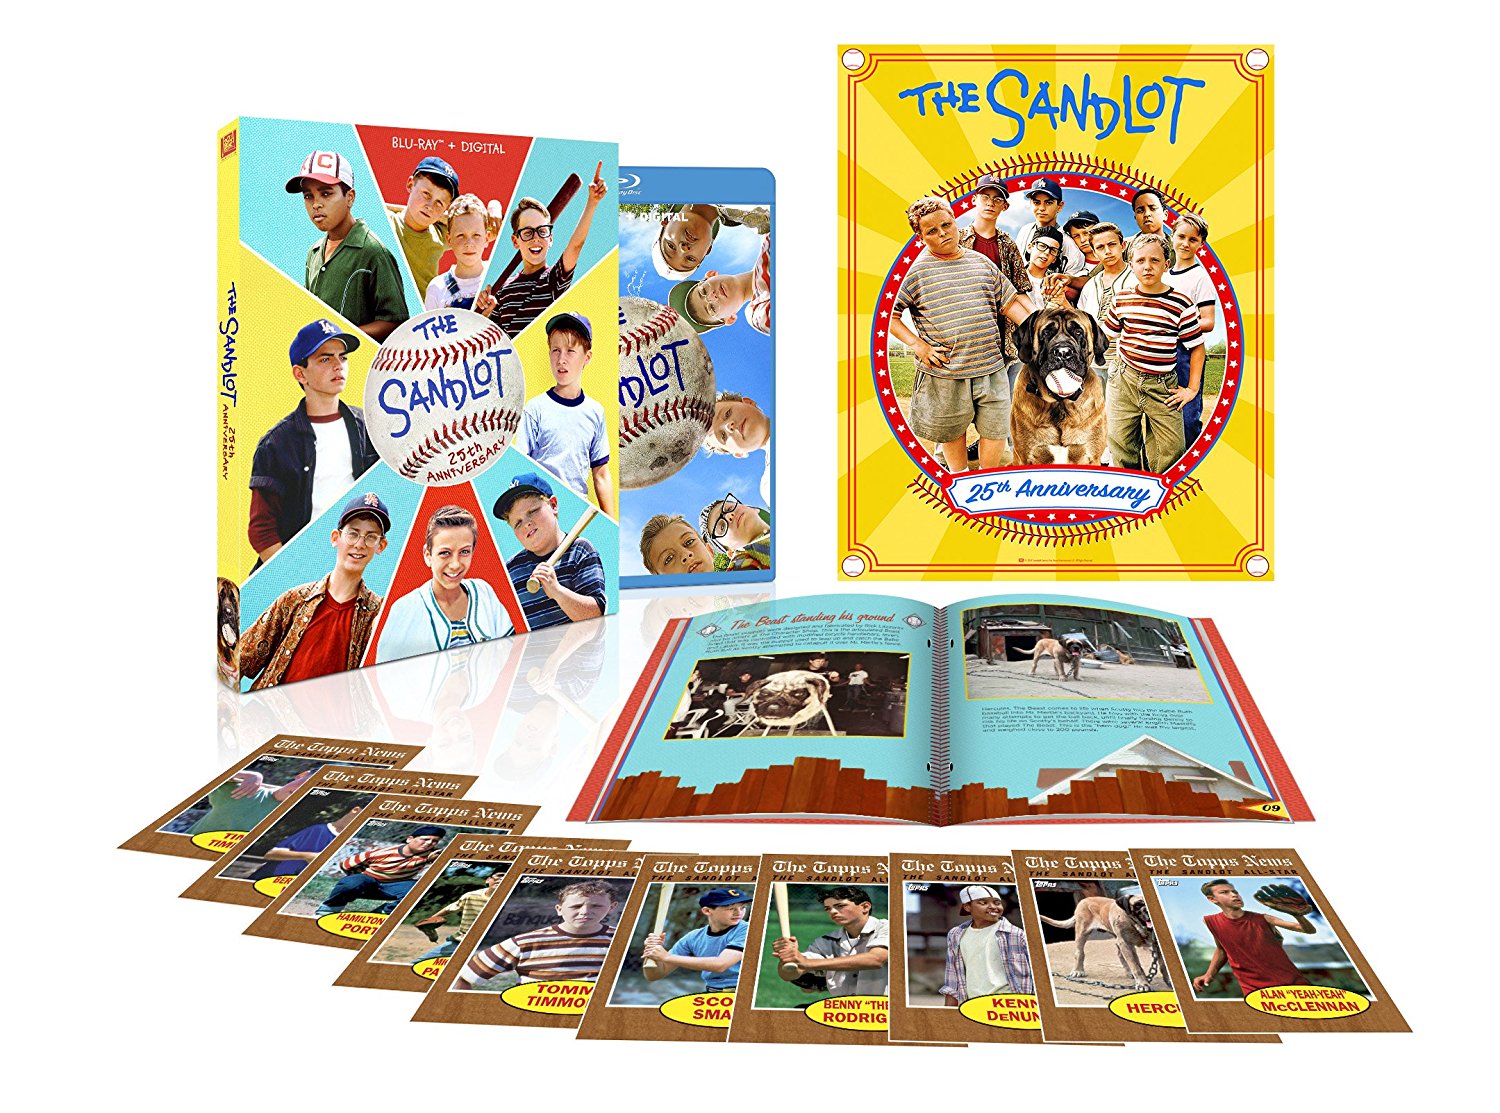 The Sandlot: 25th Anniversary Collector's Edition Blu-ray Review